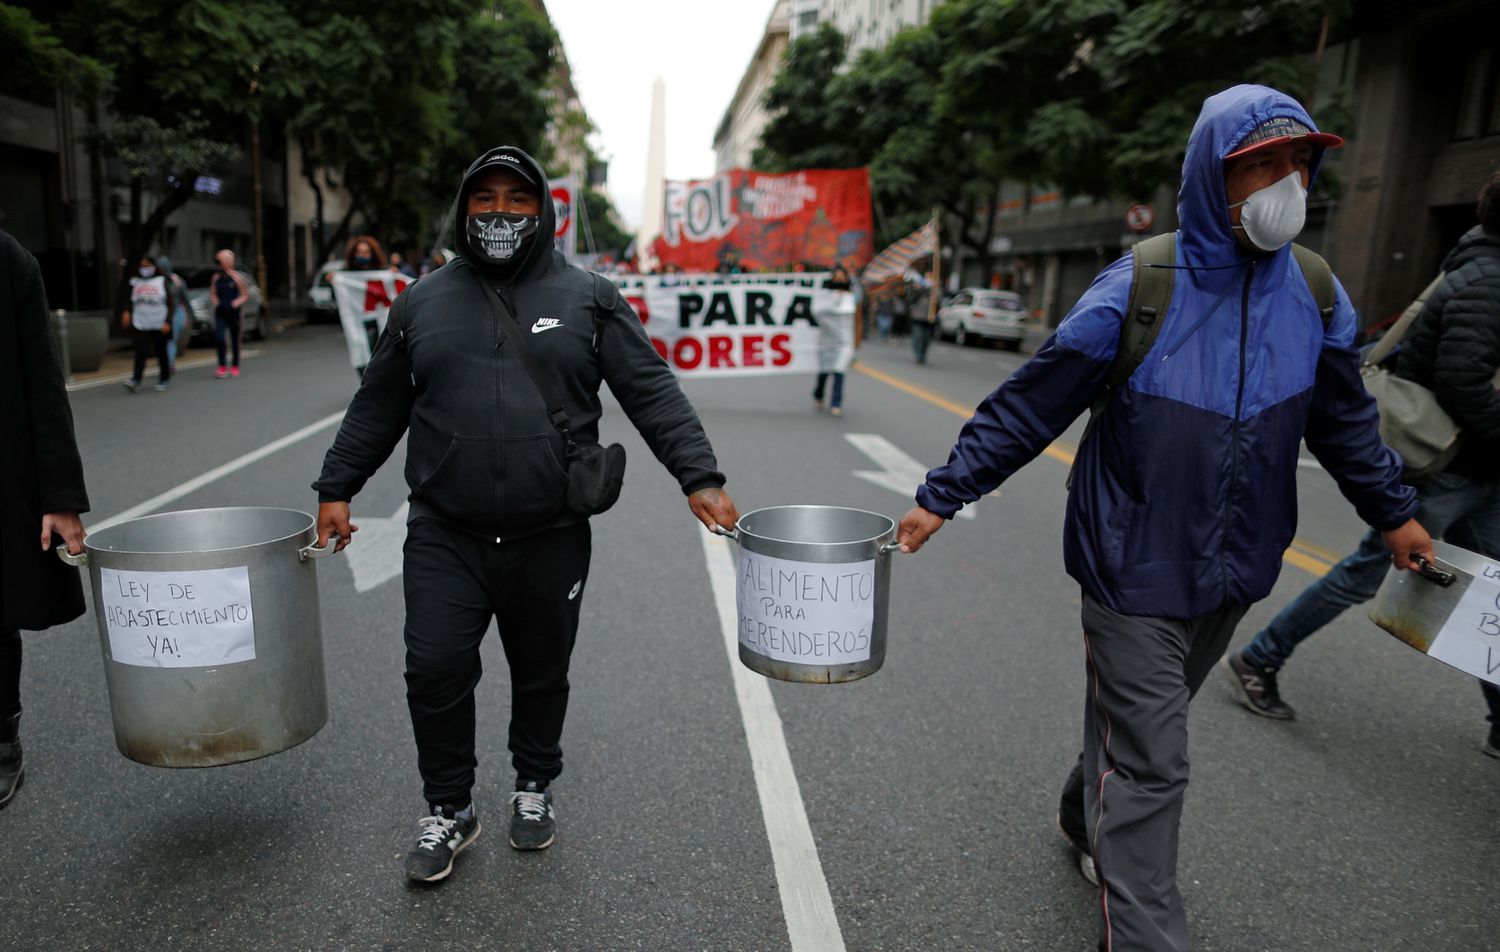 Argentinians protest against hunger and misery during the coronavirus pandemic in Buenos Aires.